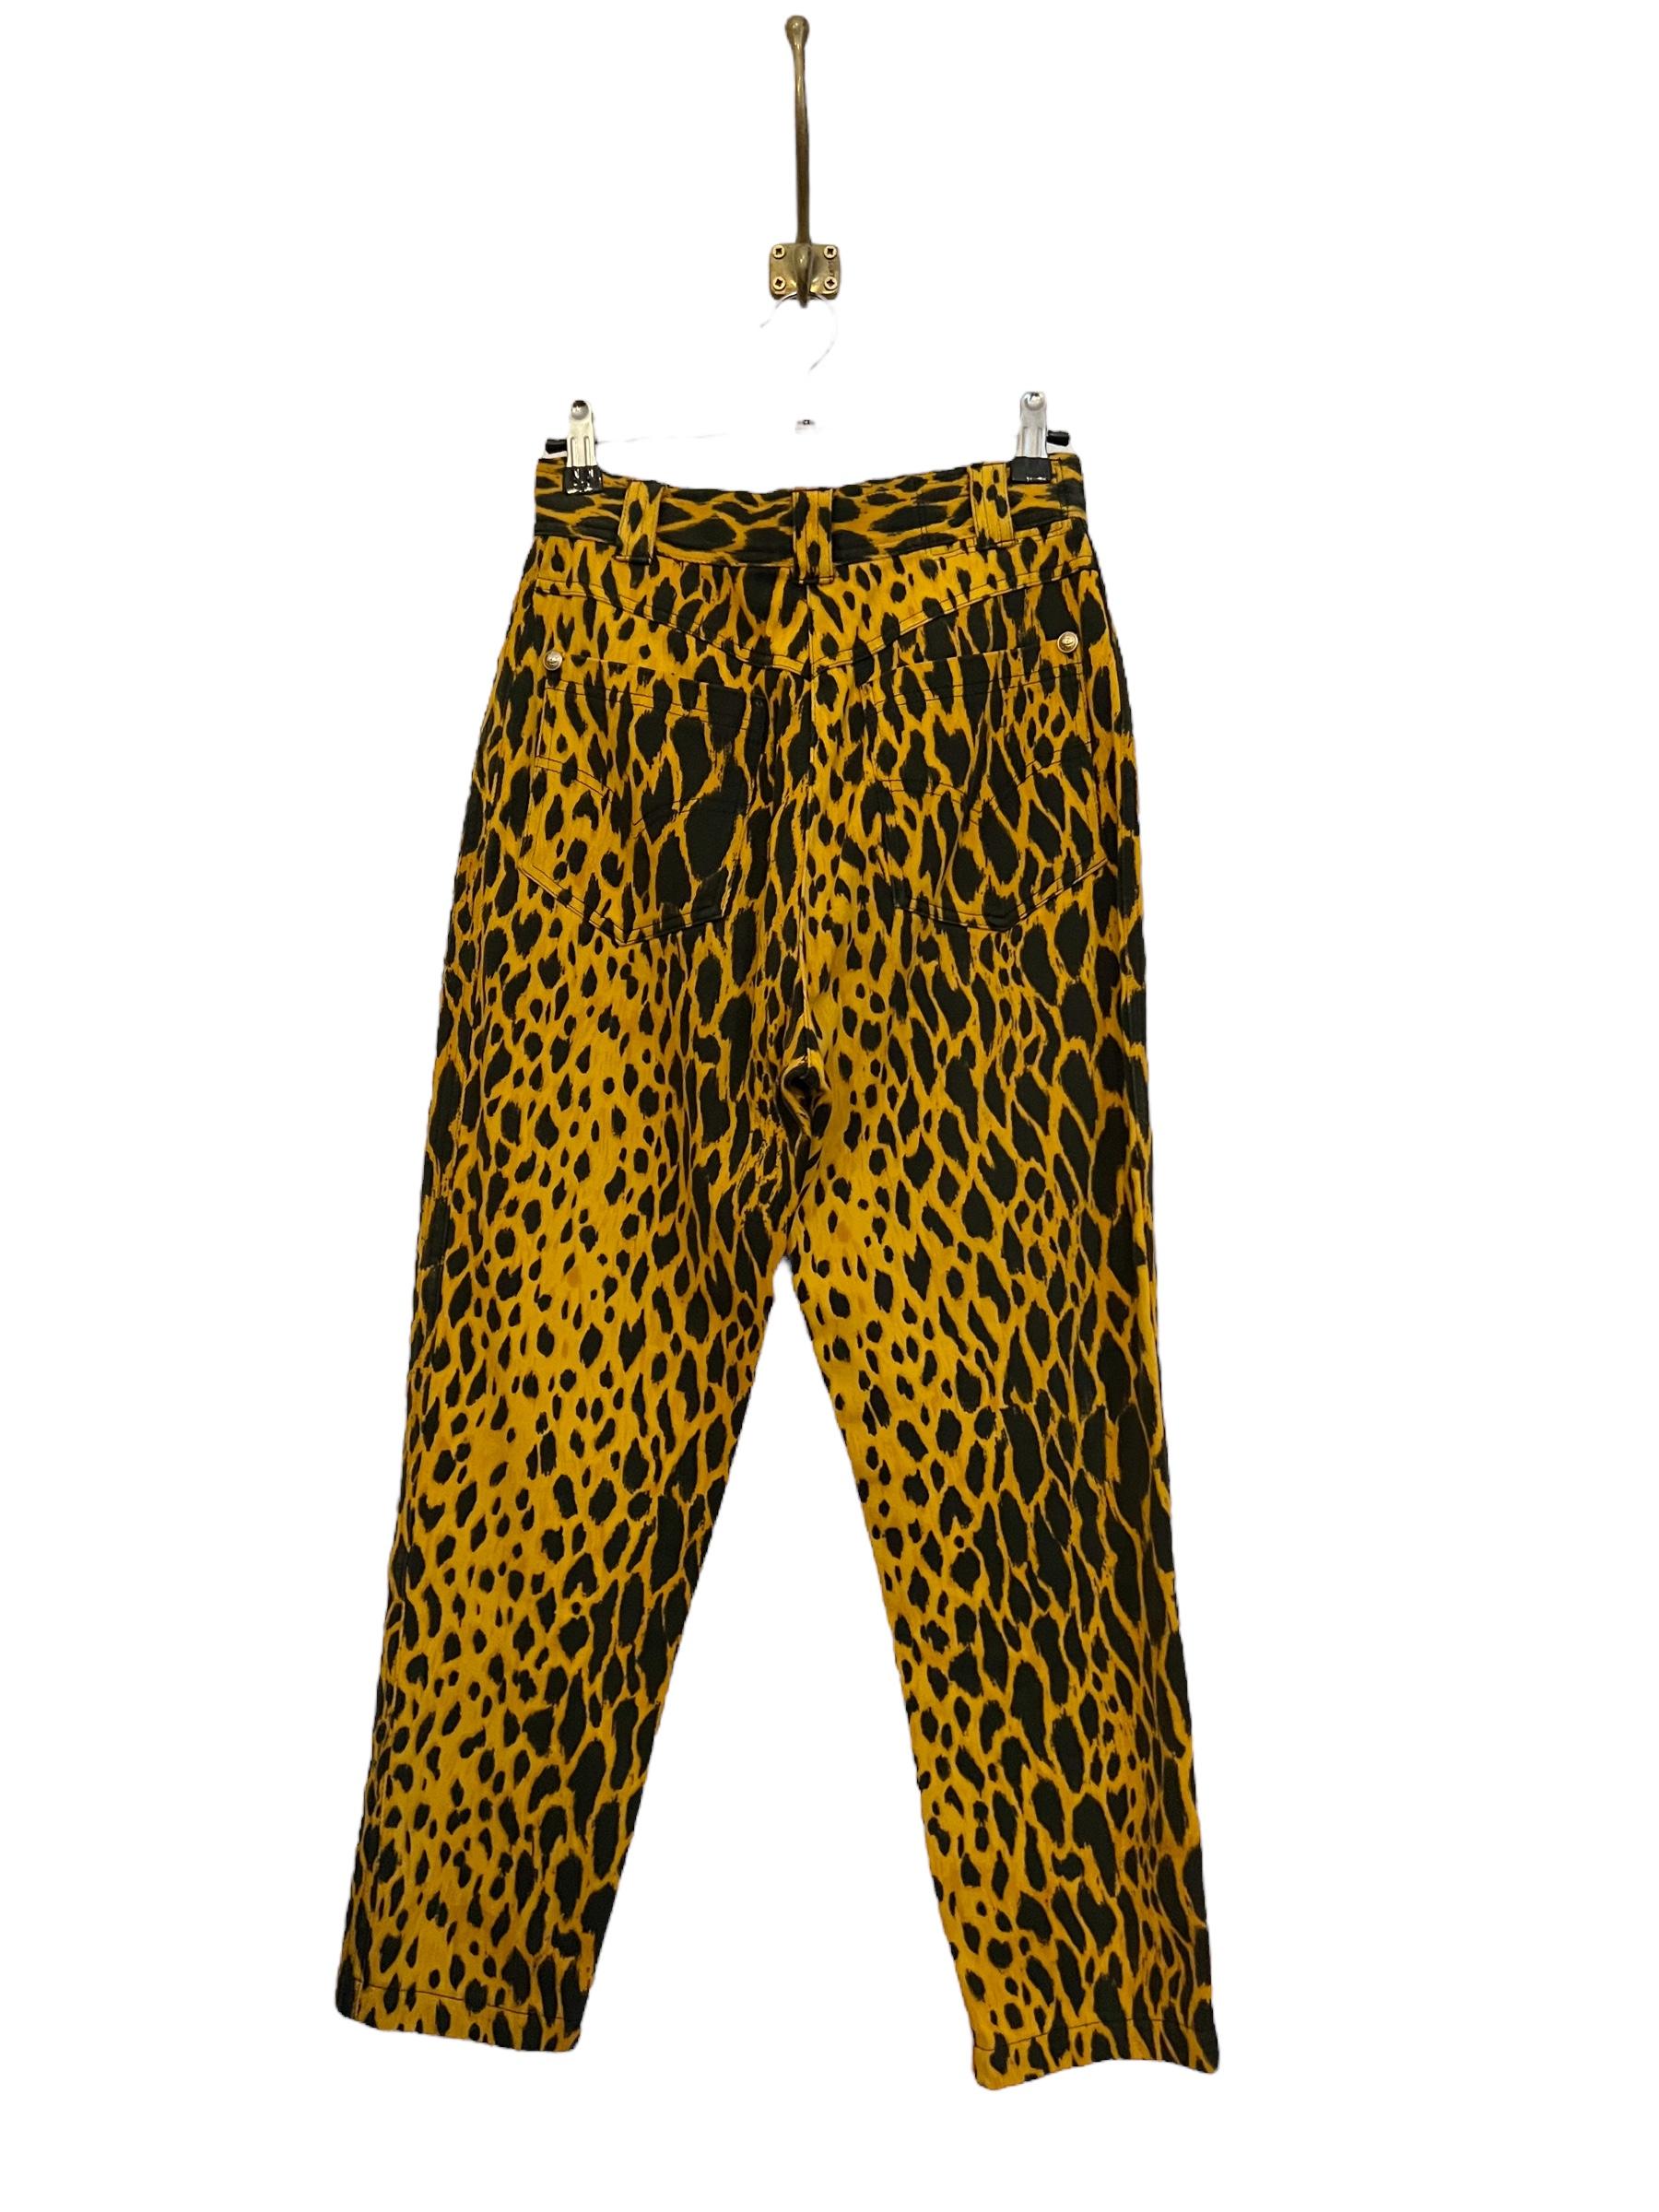 Spring 1992 Gianni Versace Runway Cheetah Leopard High waisted patterned Jeans For Sale 1